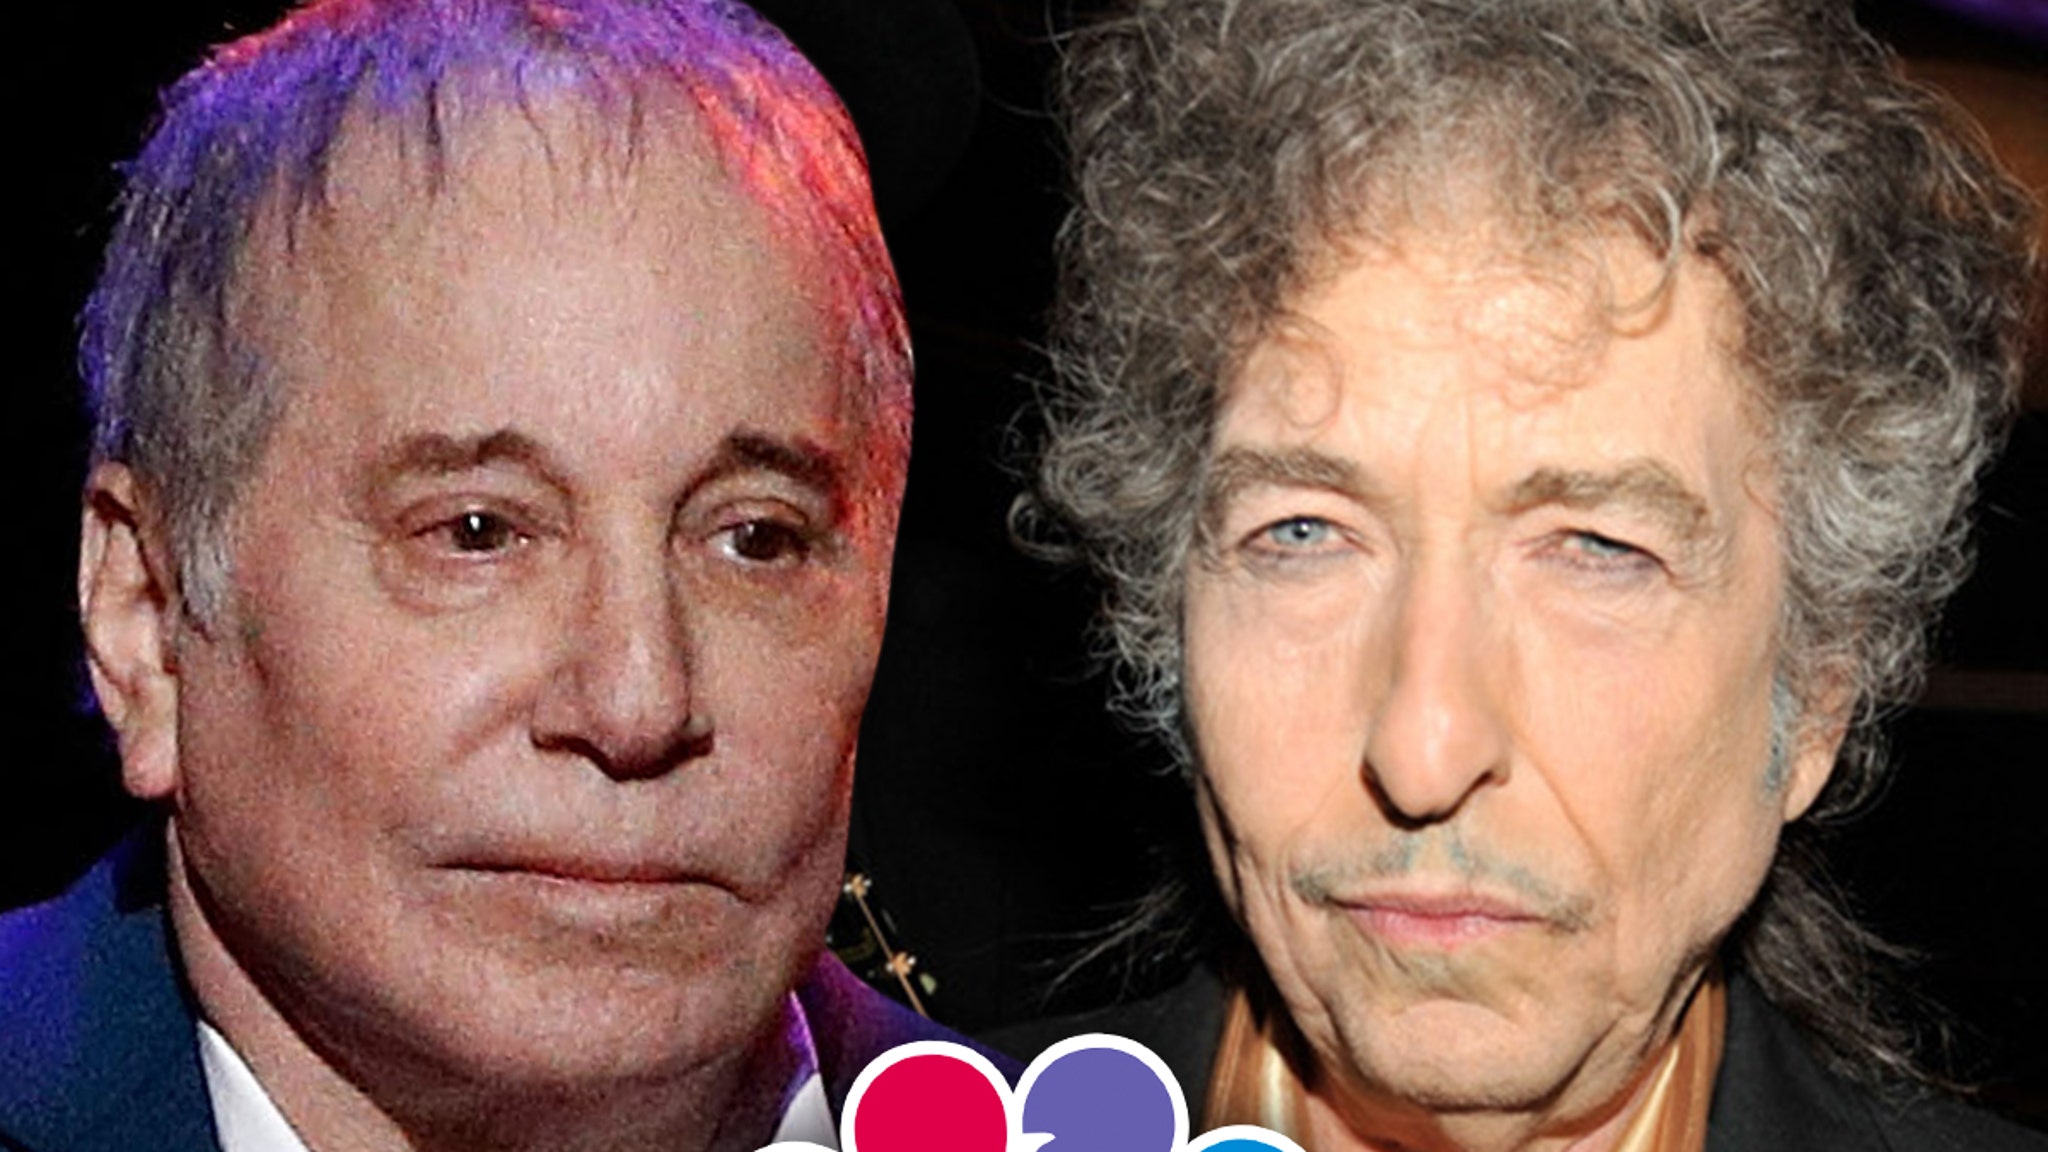 Paul Simon will be a ‘footnote’ alongside Bob Dylan, says NBC writer